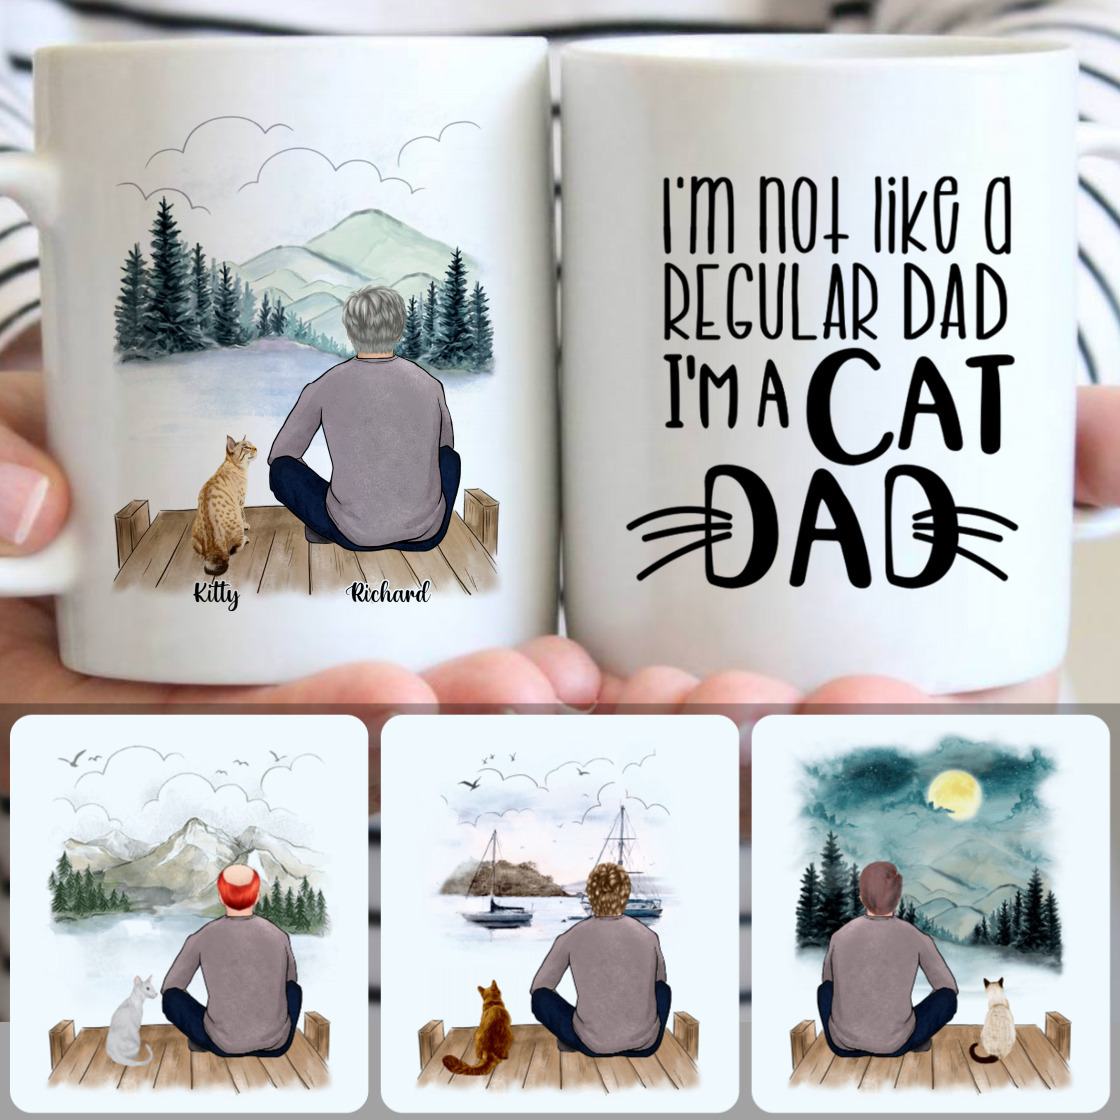 Personalized Mug, Best Gifts For Cat Dad, Man & Cat Customized Coffee Mug With Names